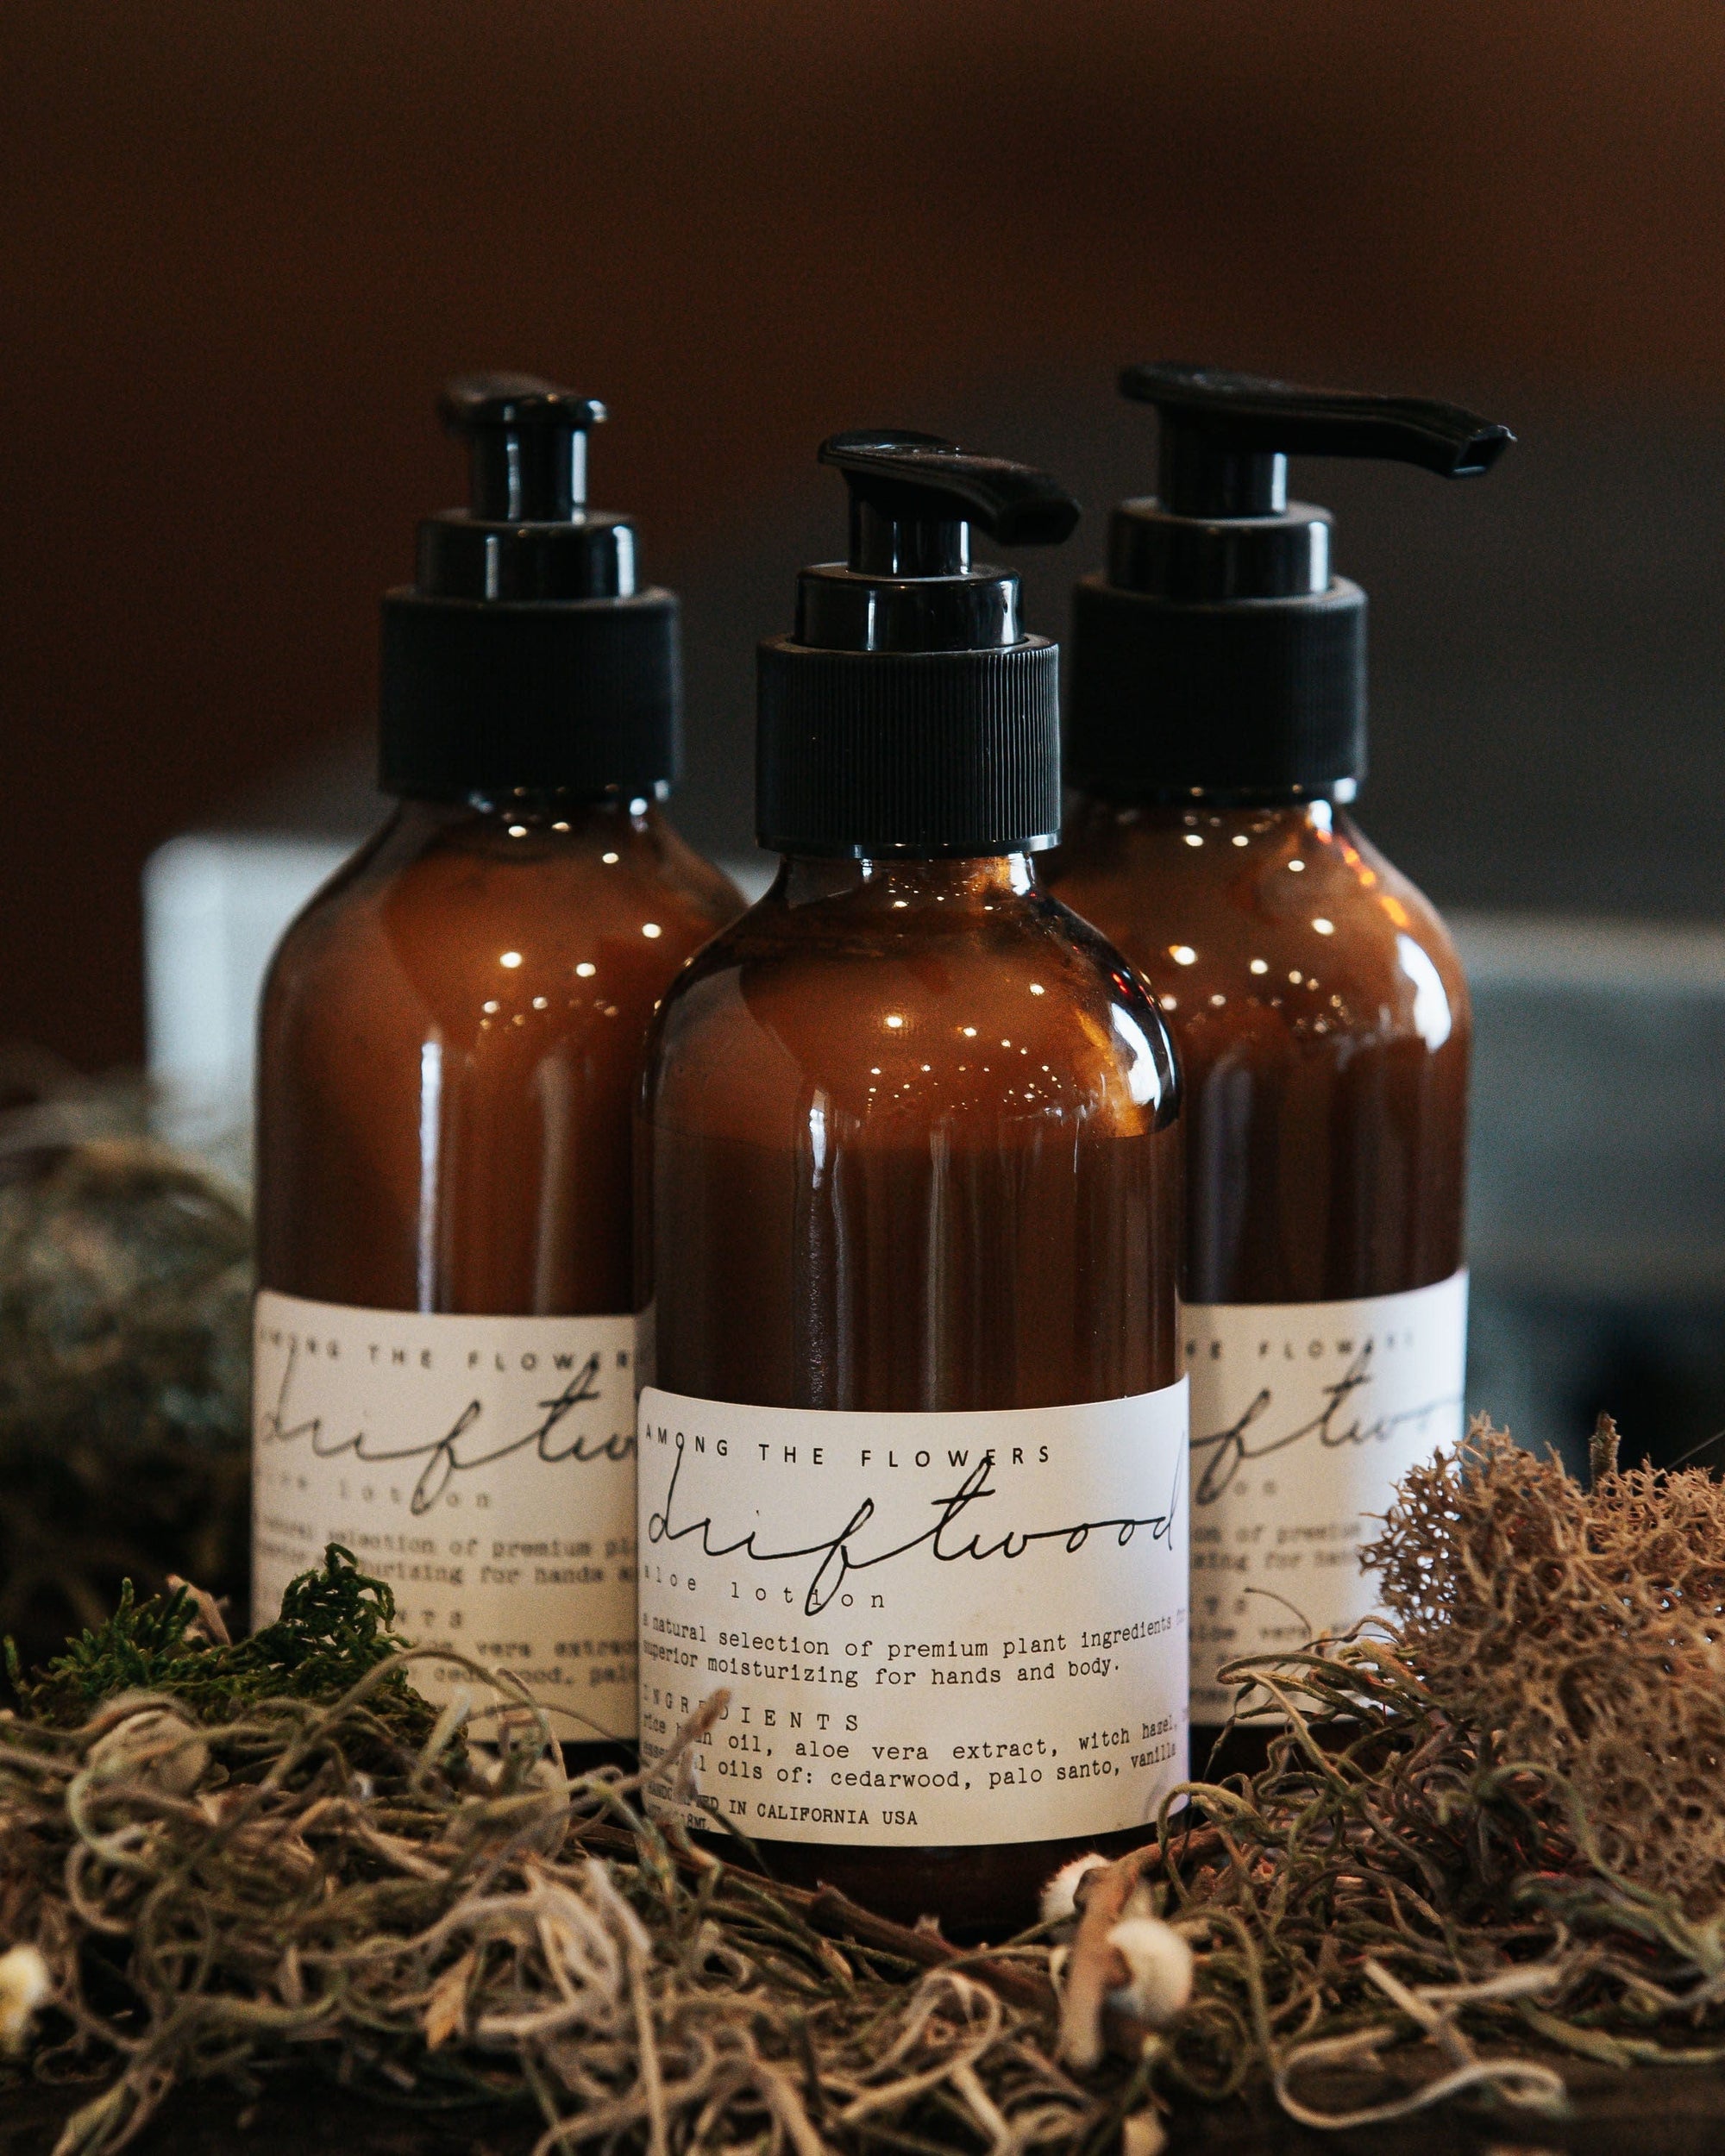 Among the Flowers Personal Care Driftwood Botanical Aloe Lotion